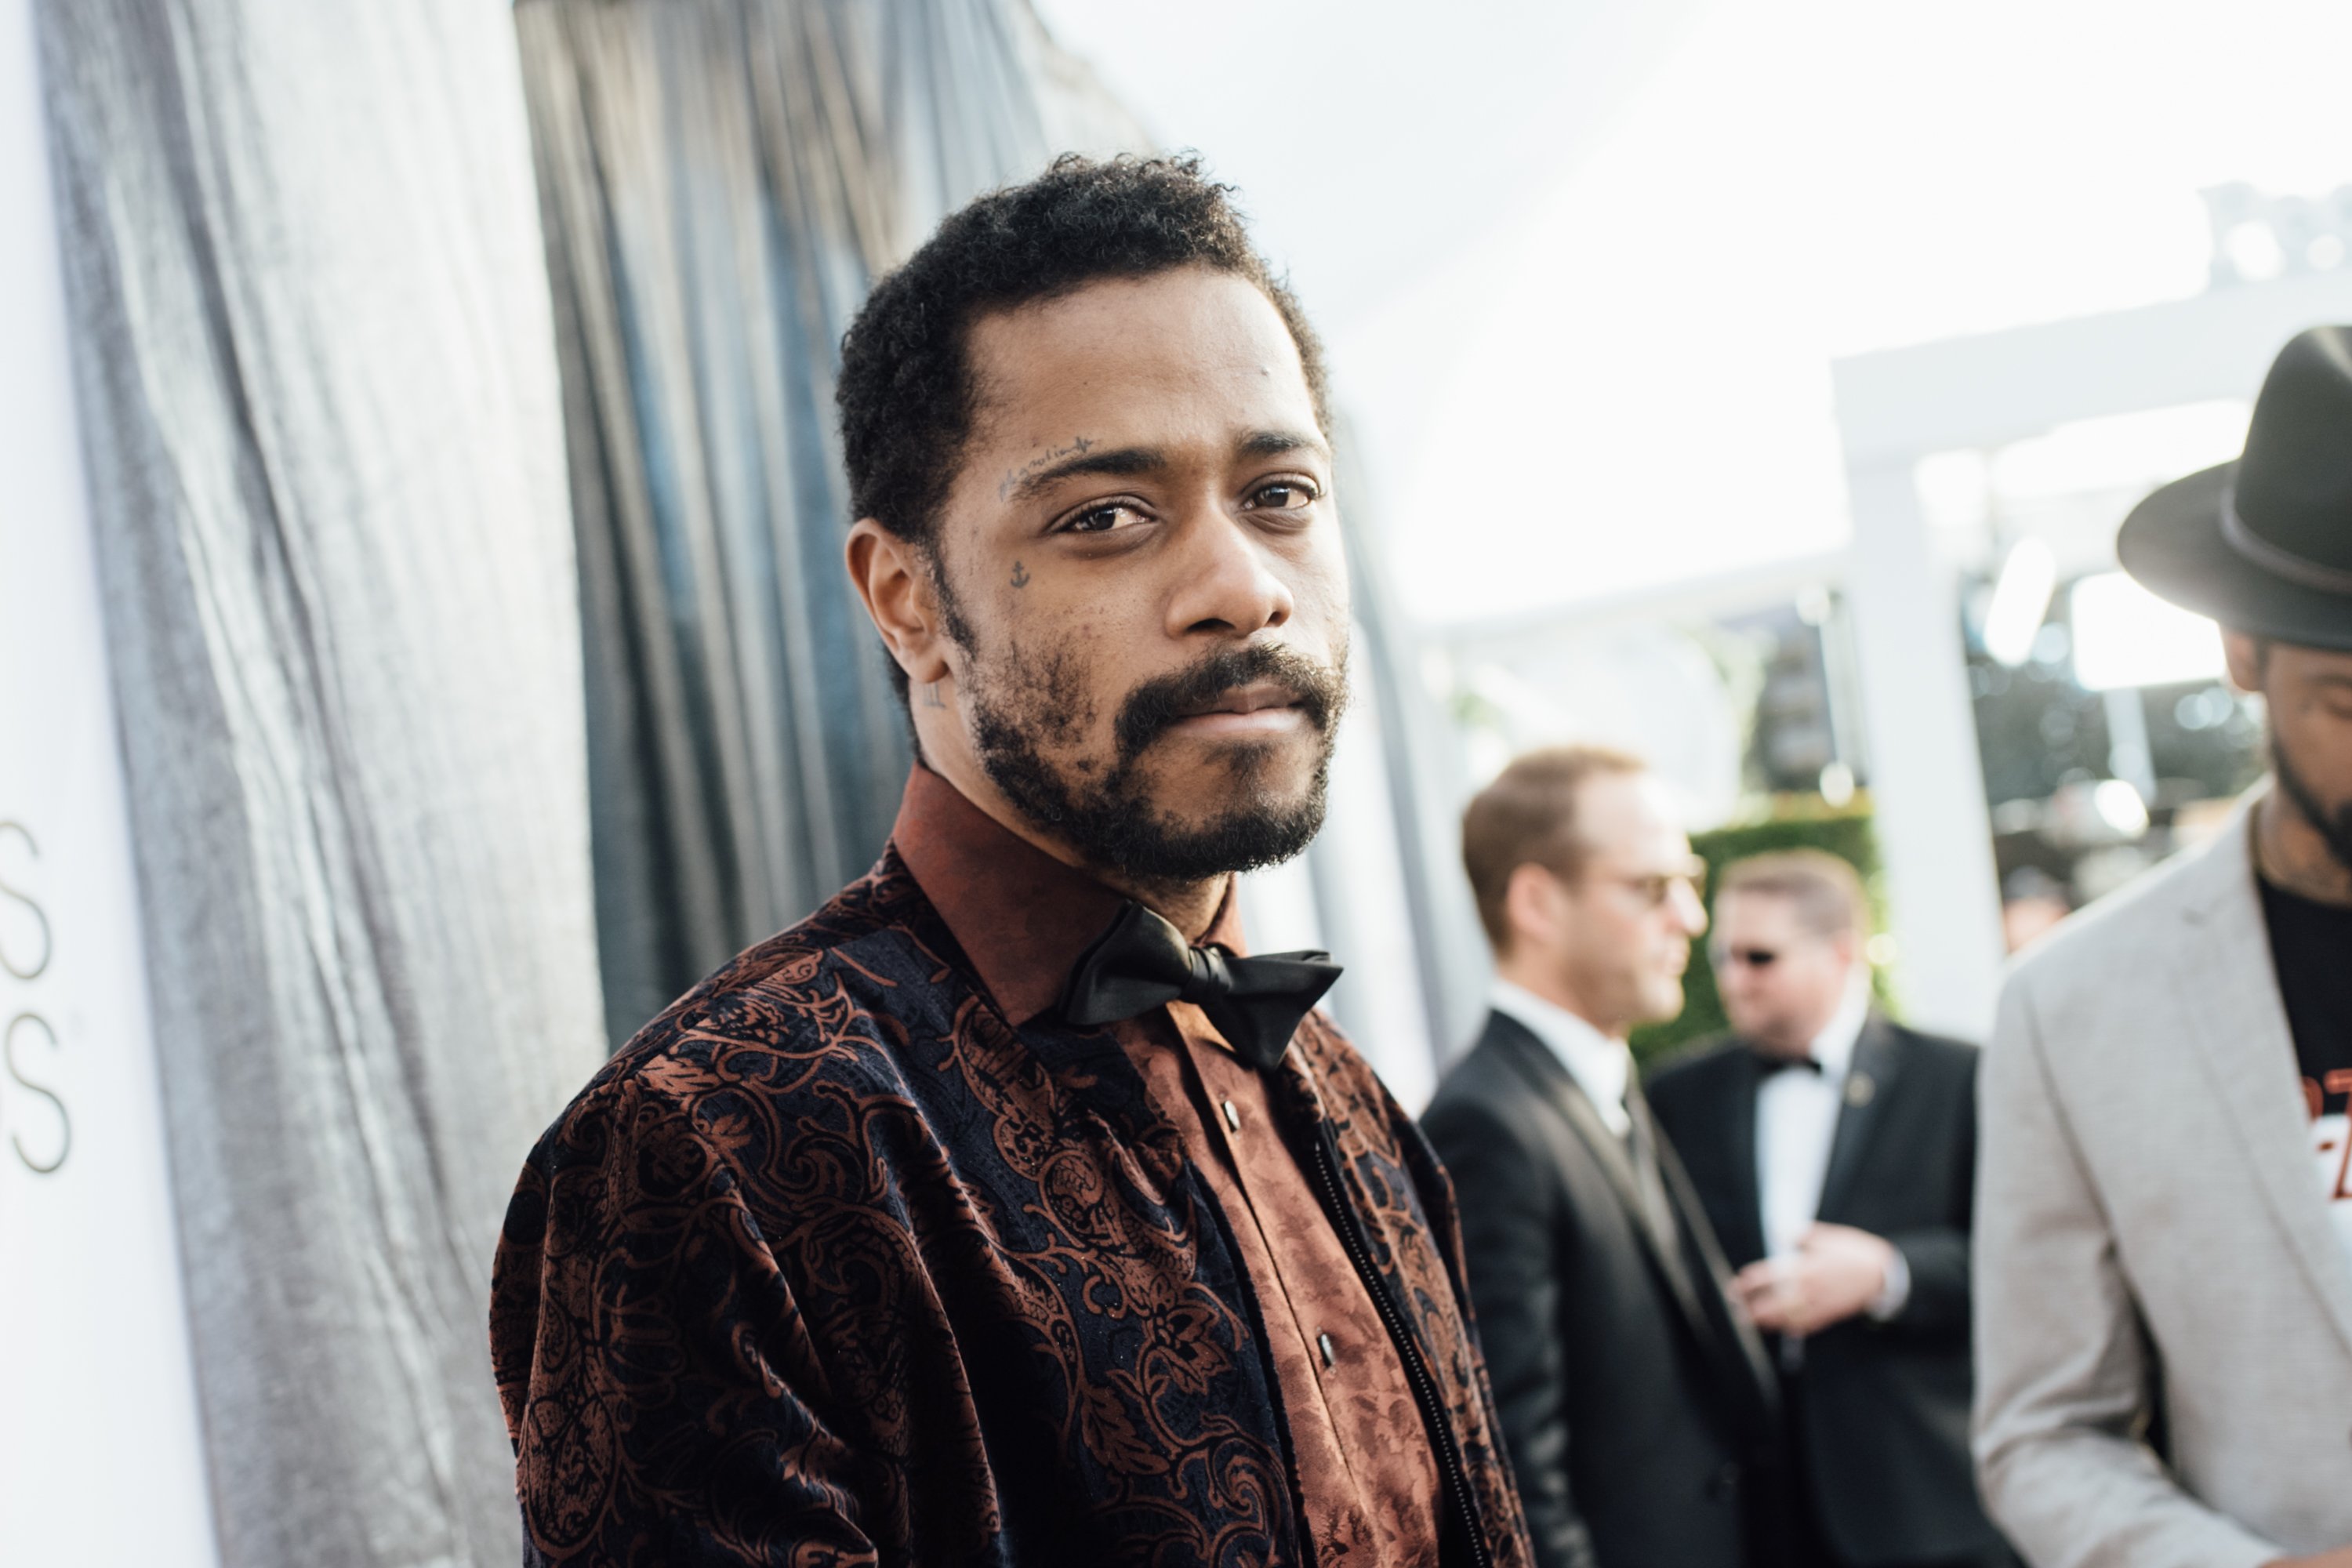 Lakeith Stanfield arrives at the 25th annual Screen Actors Guild Awards on January 27, 2019 in Los Angeles, California. | Source: Getty Images